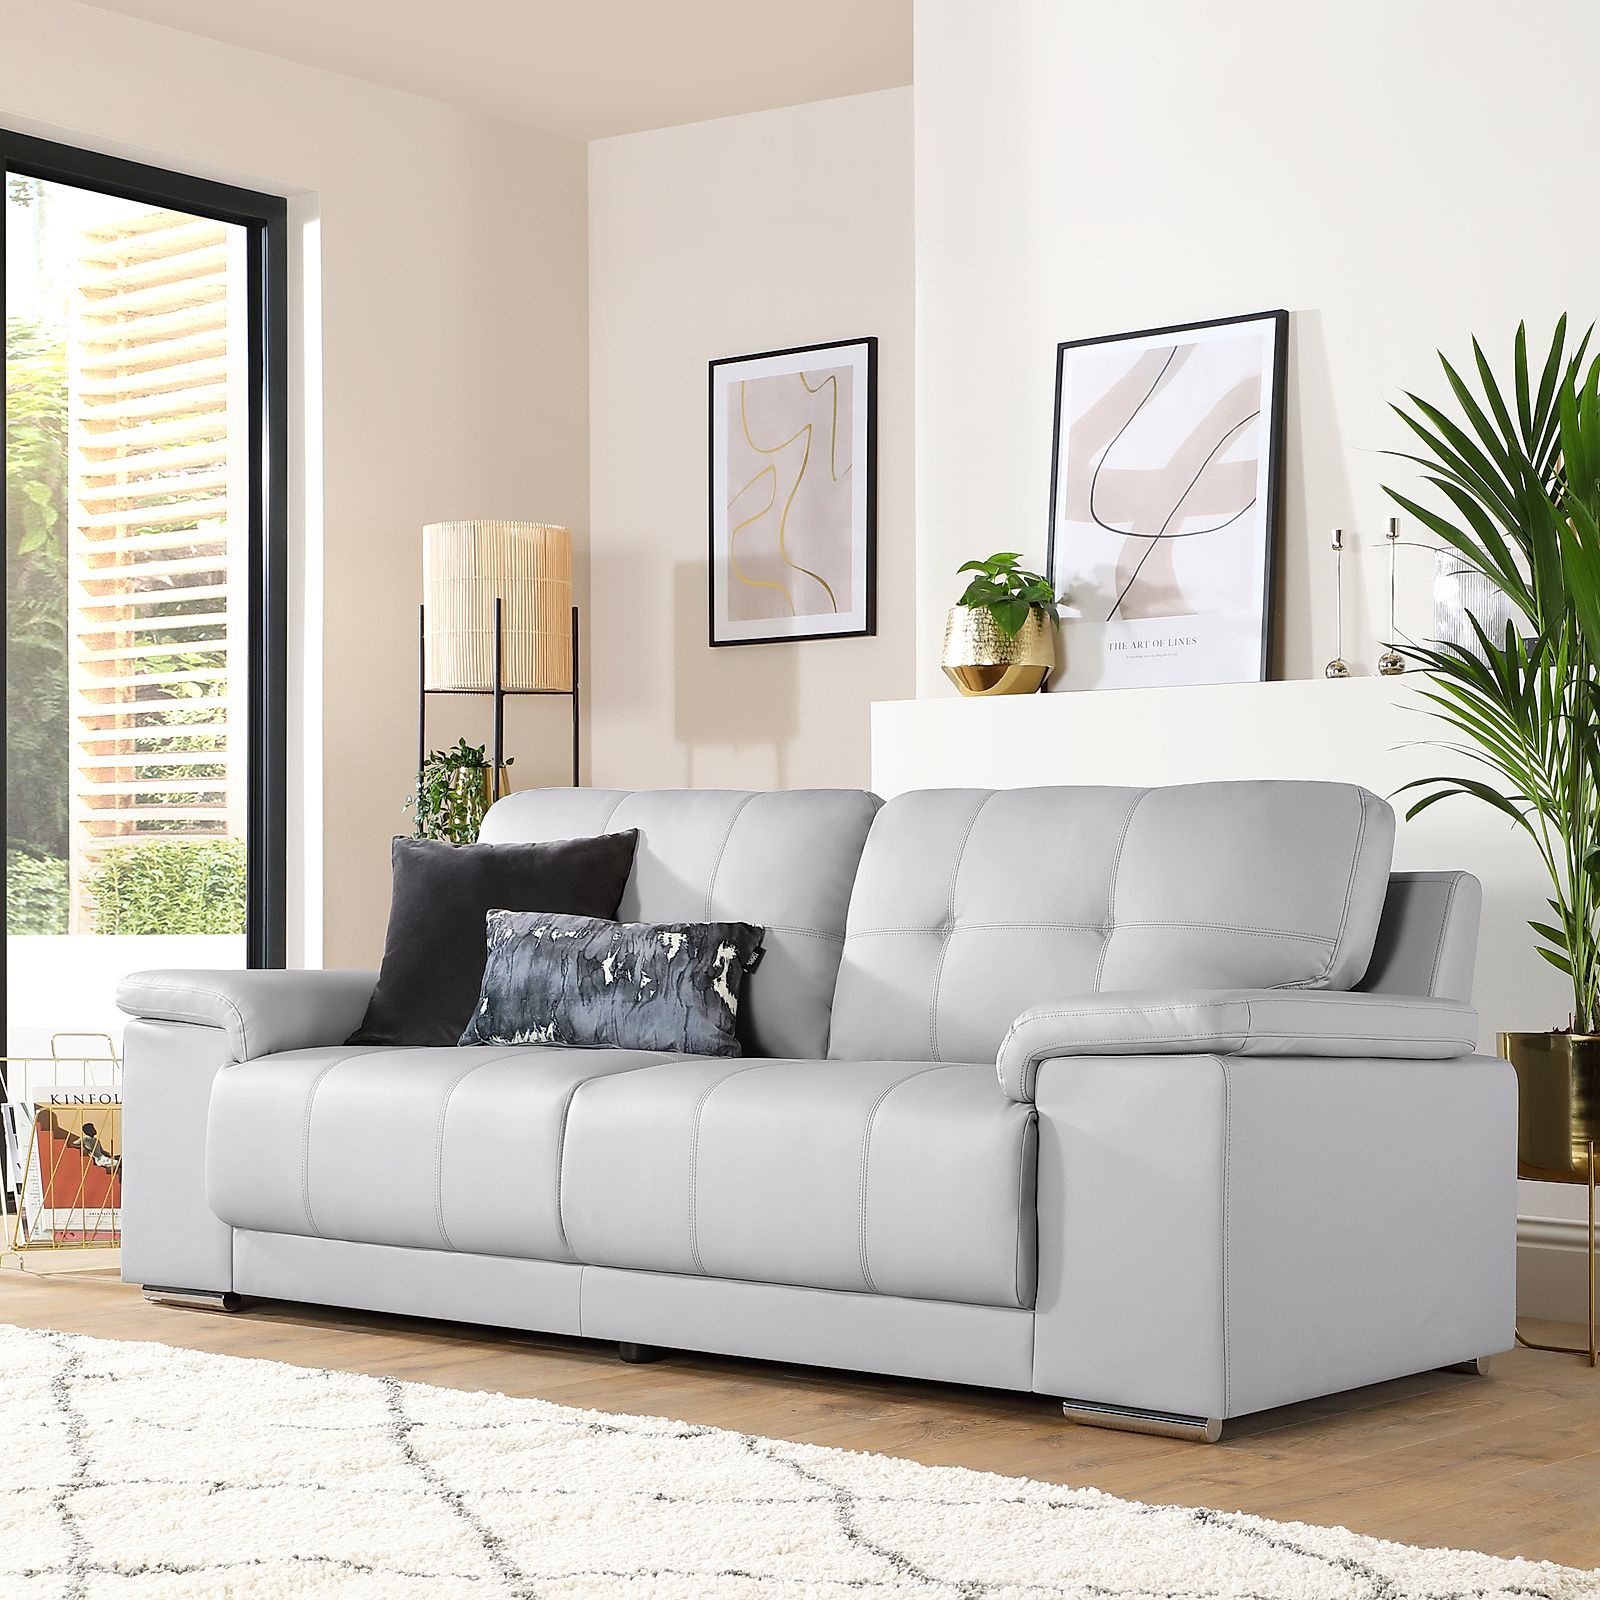 Kansas Light Grey Leather 3 Seater Sofa | Furniture Choice For Sofas In Light Grey (Gallery 4 of 20)